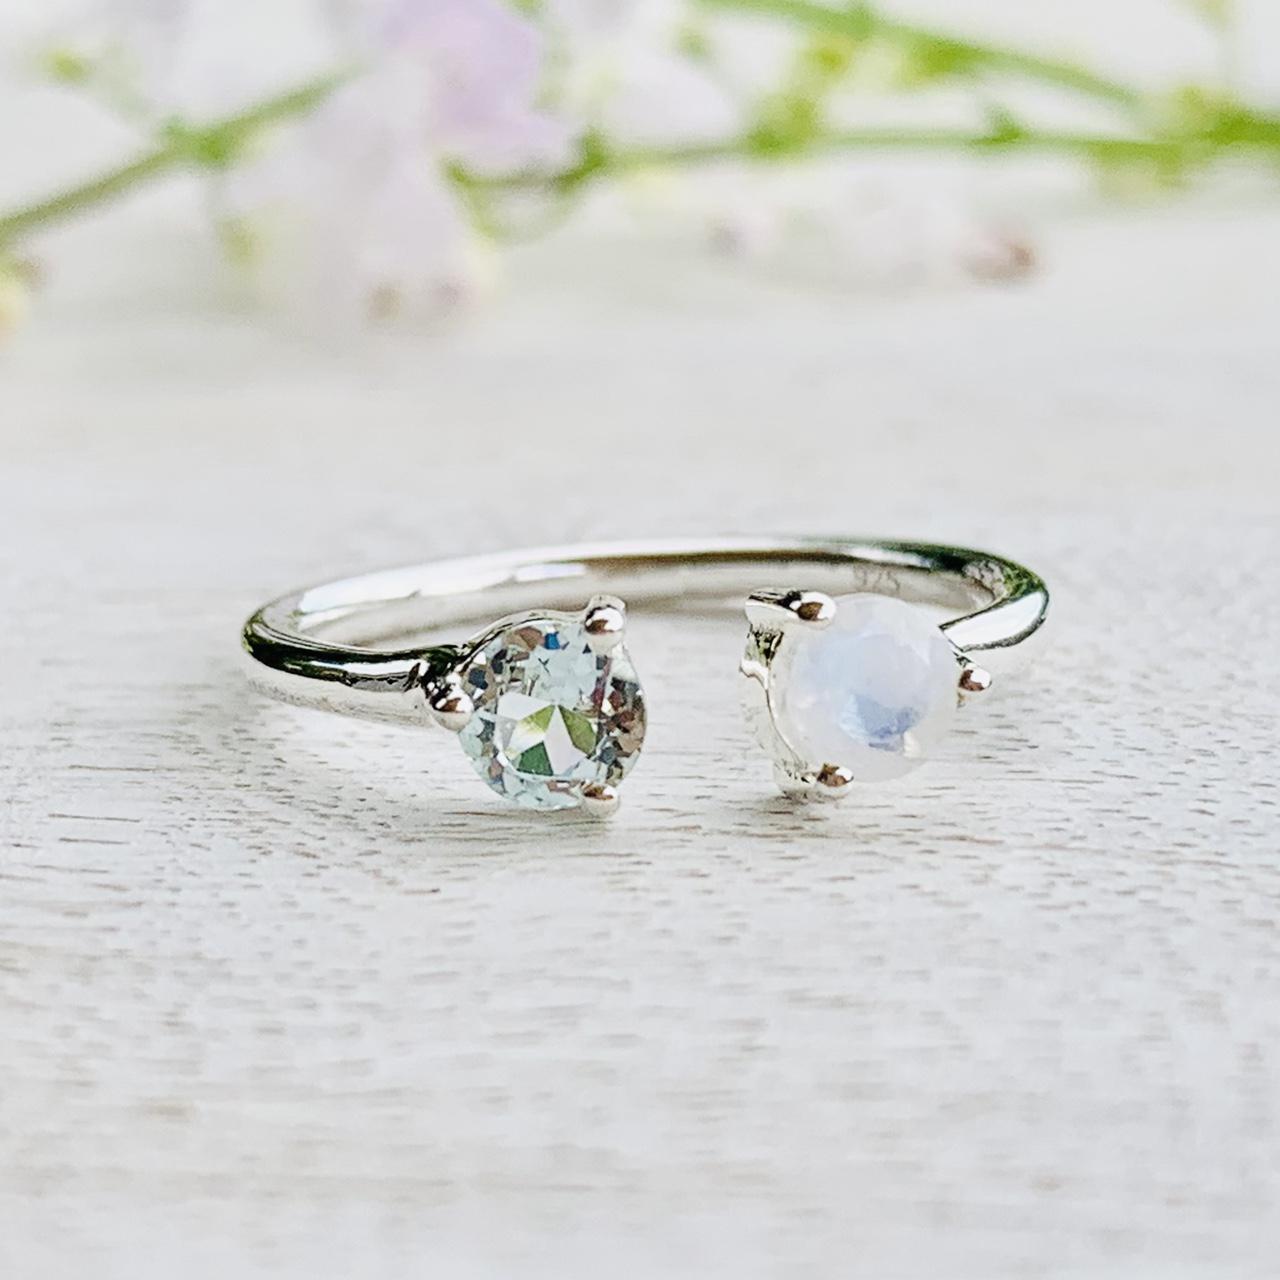 Product Image 1 - Moonstone Aquamarine Ring

Material: Sterling Silver,